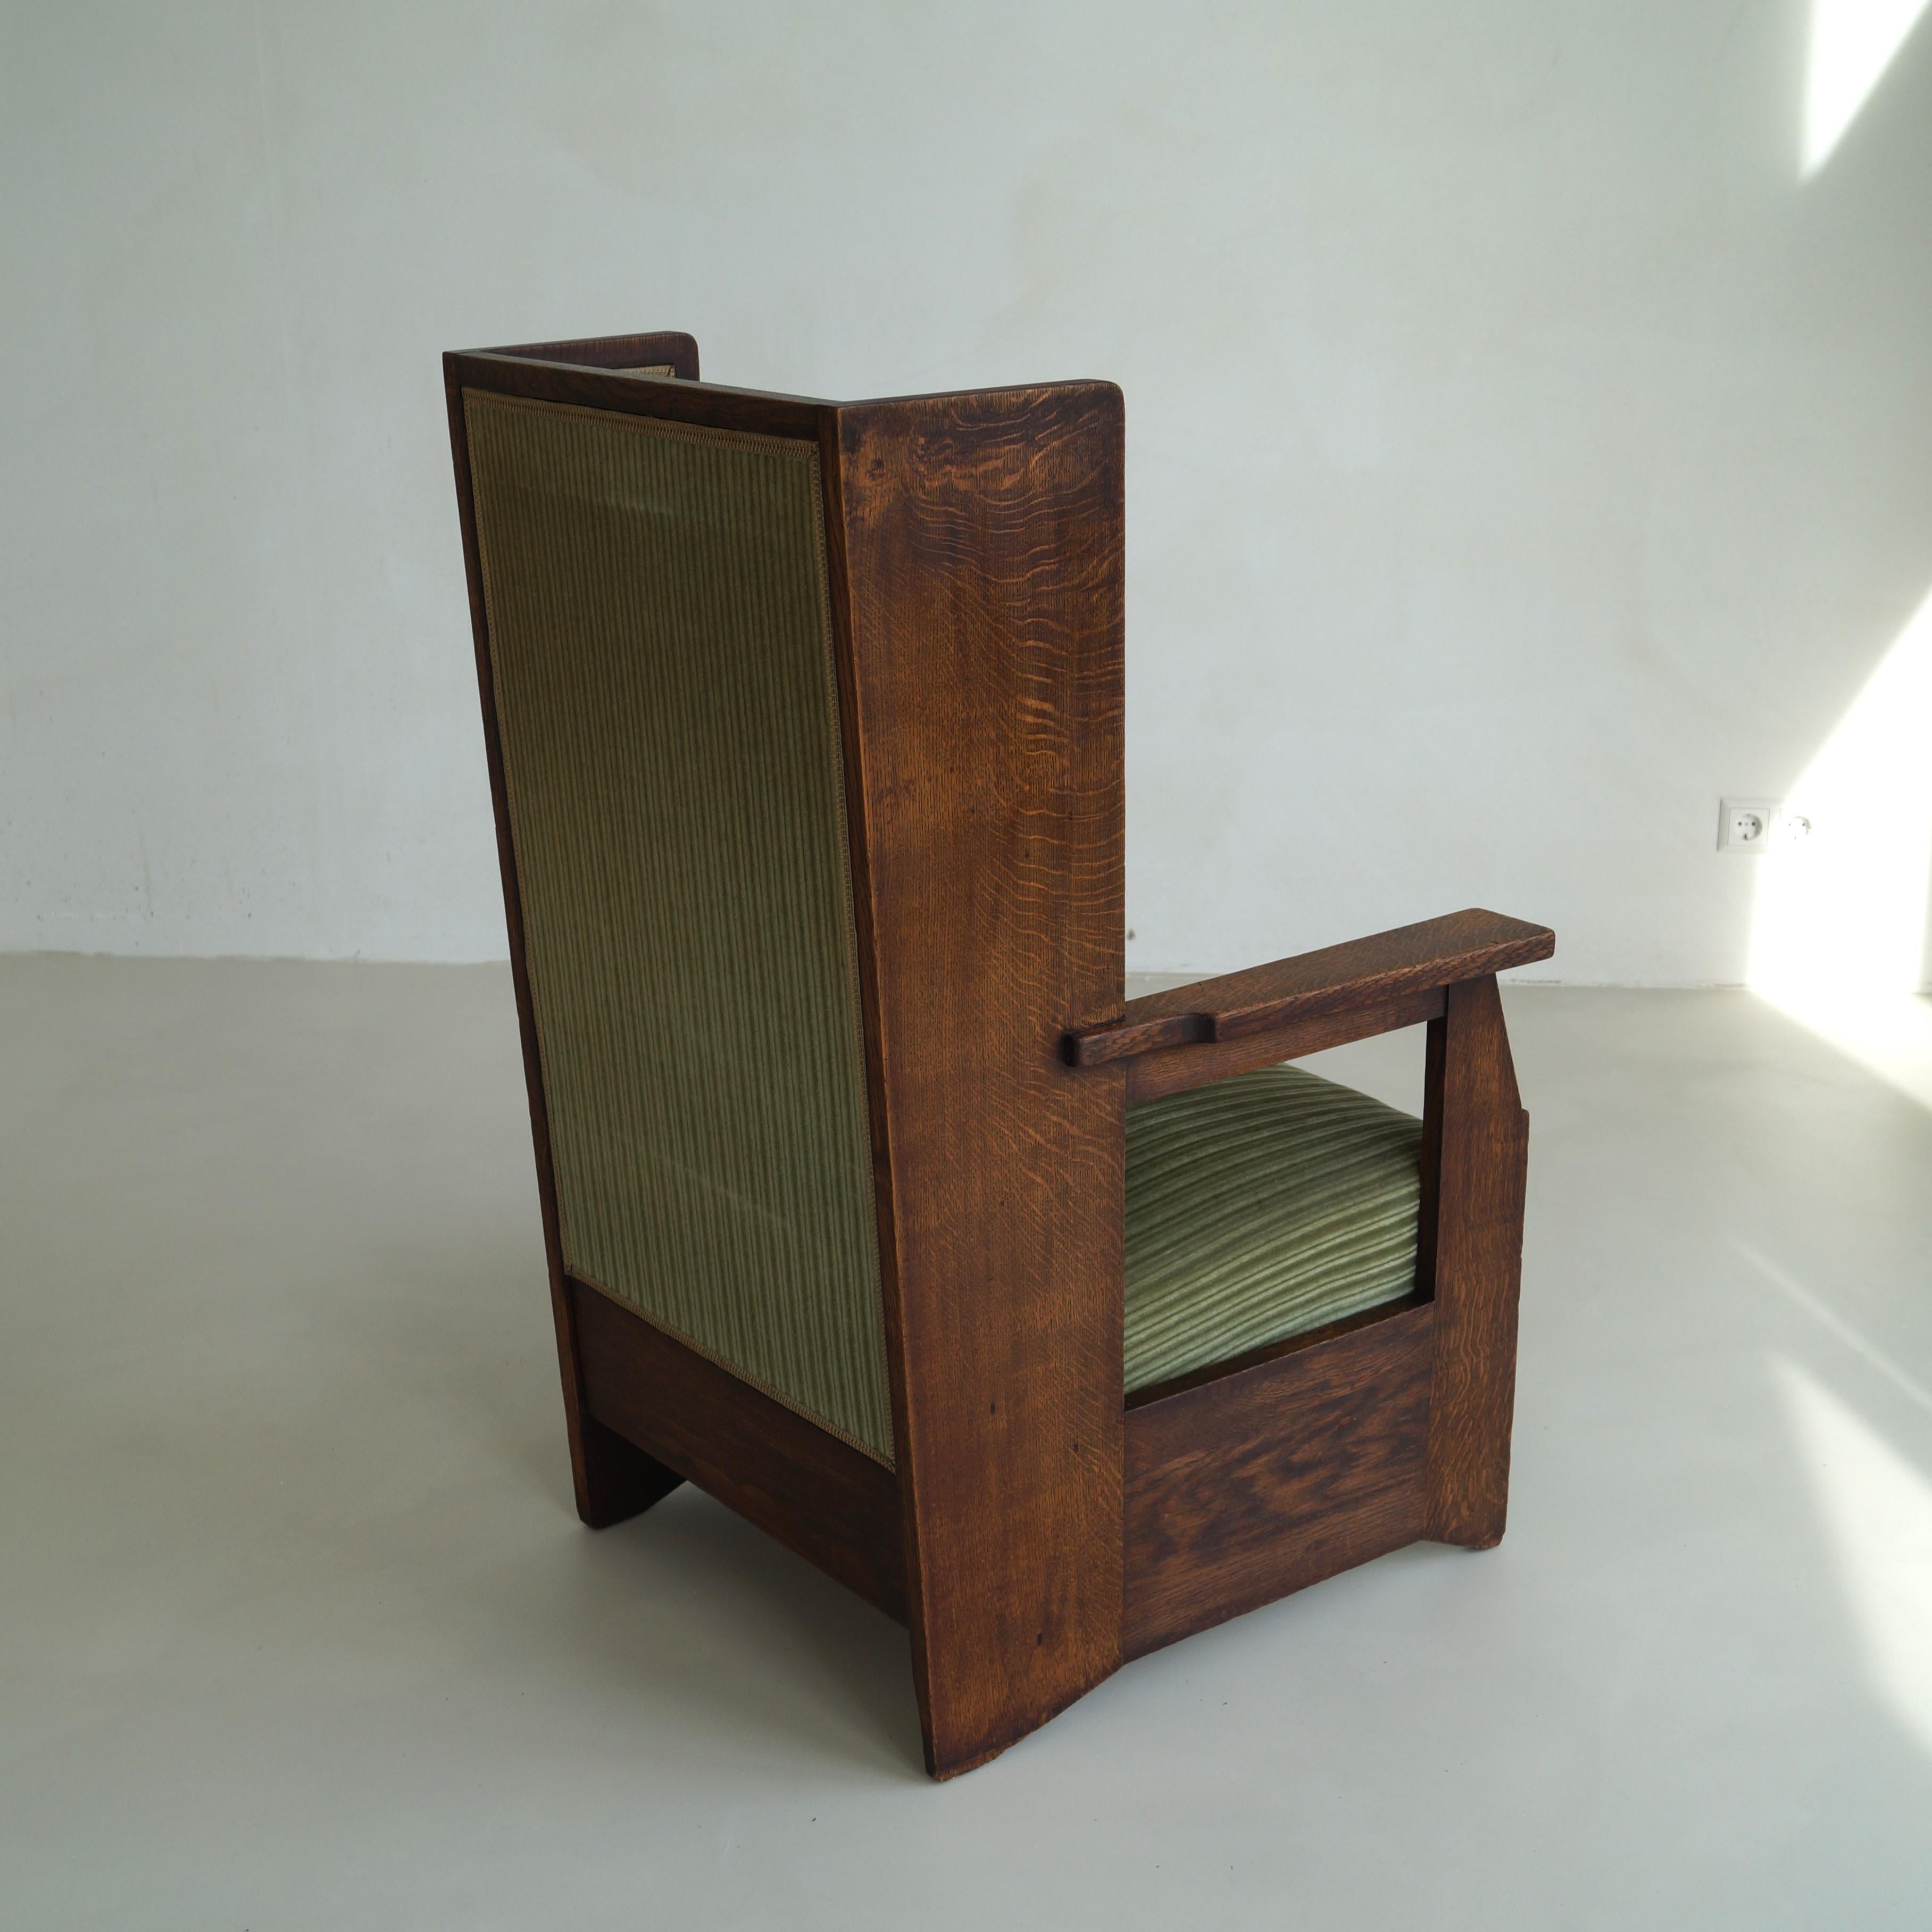 Dutch Art Deco Haagse School high back chair by Hendrik Wouda for Pander, 1924 For Sale 2